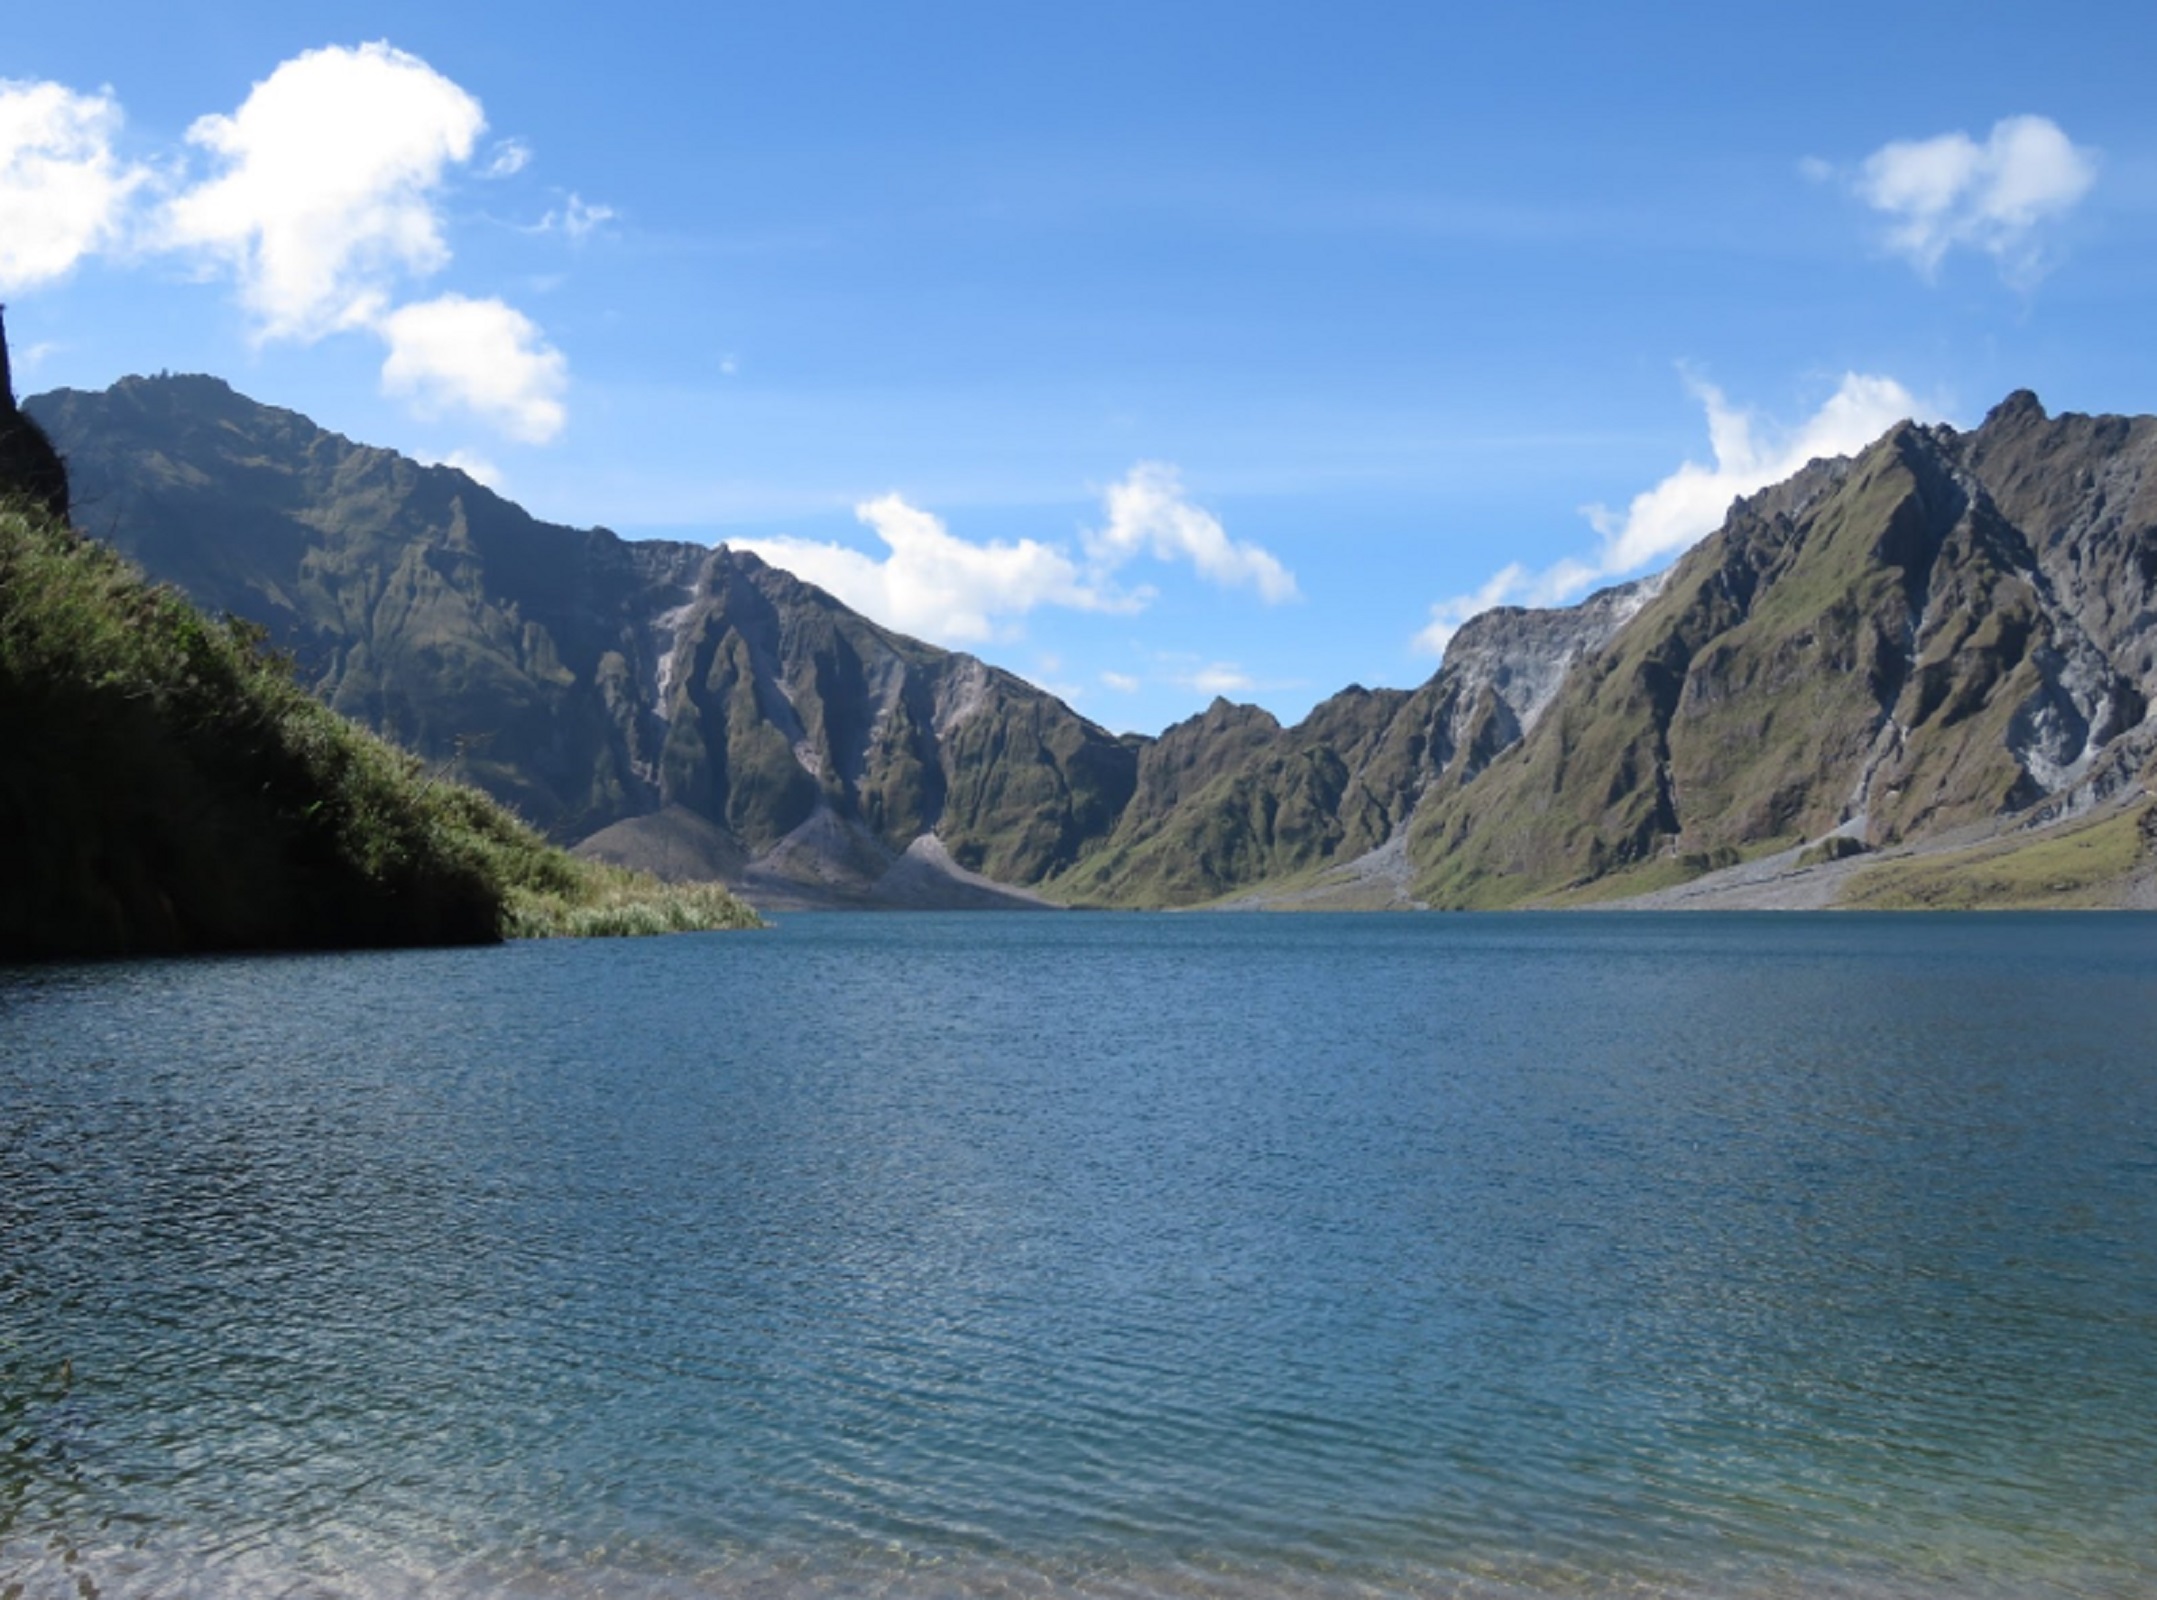 Guided Full Day Hike To Mt Pinatubo Crater Lake With 4x4 1252